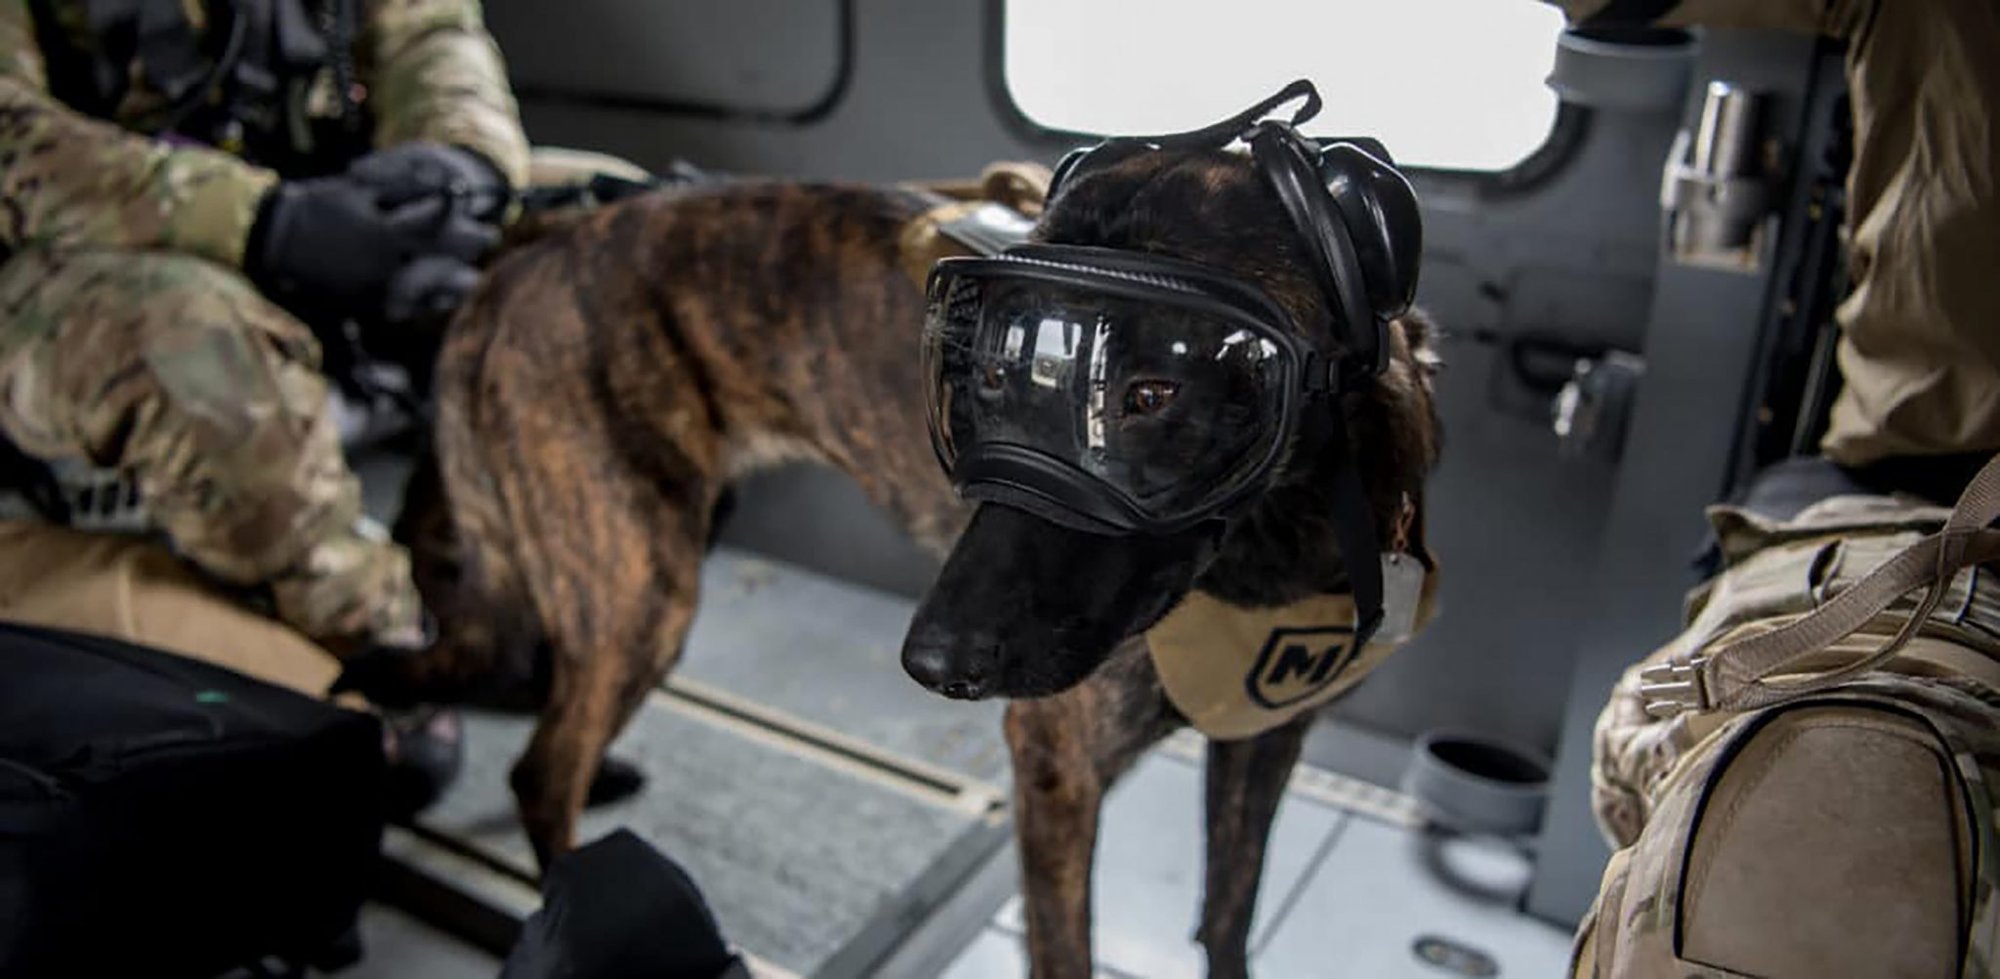 This is Callie, the only search and rescue dog in the entire U.S. military.